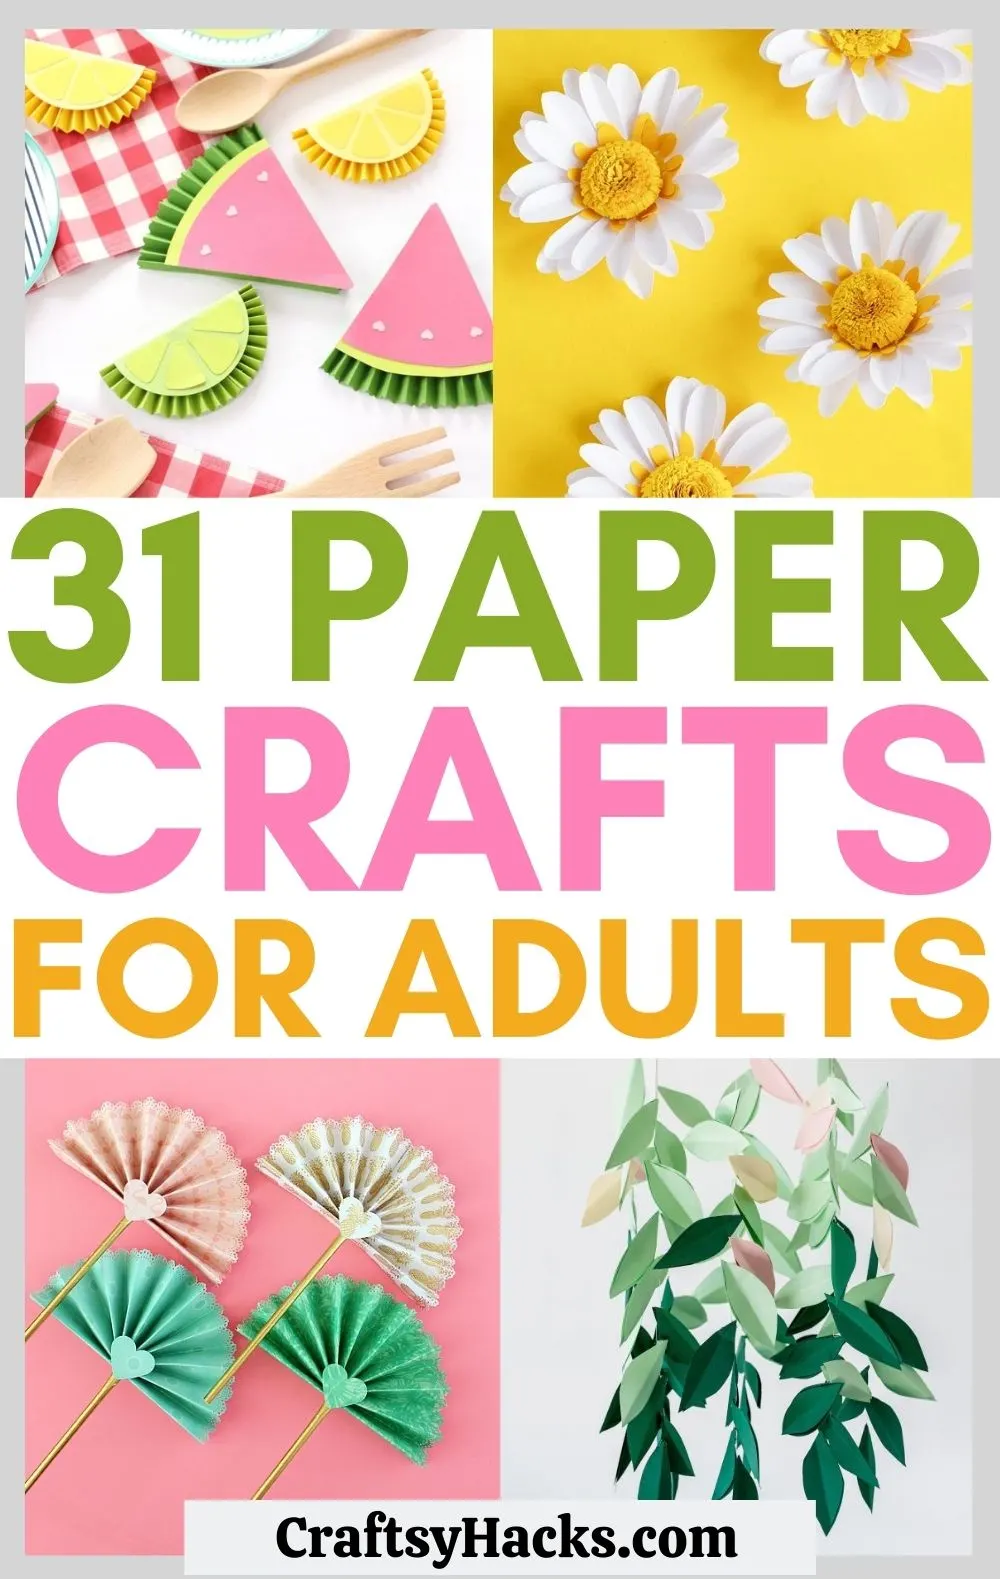 Fun And Simple DIY Crafts To Try In Your Spare Time